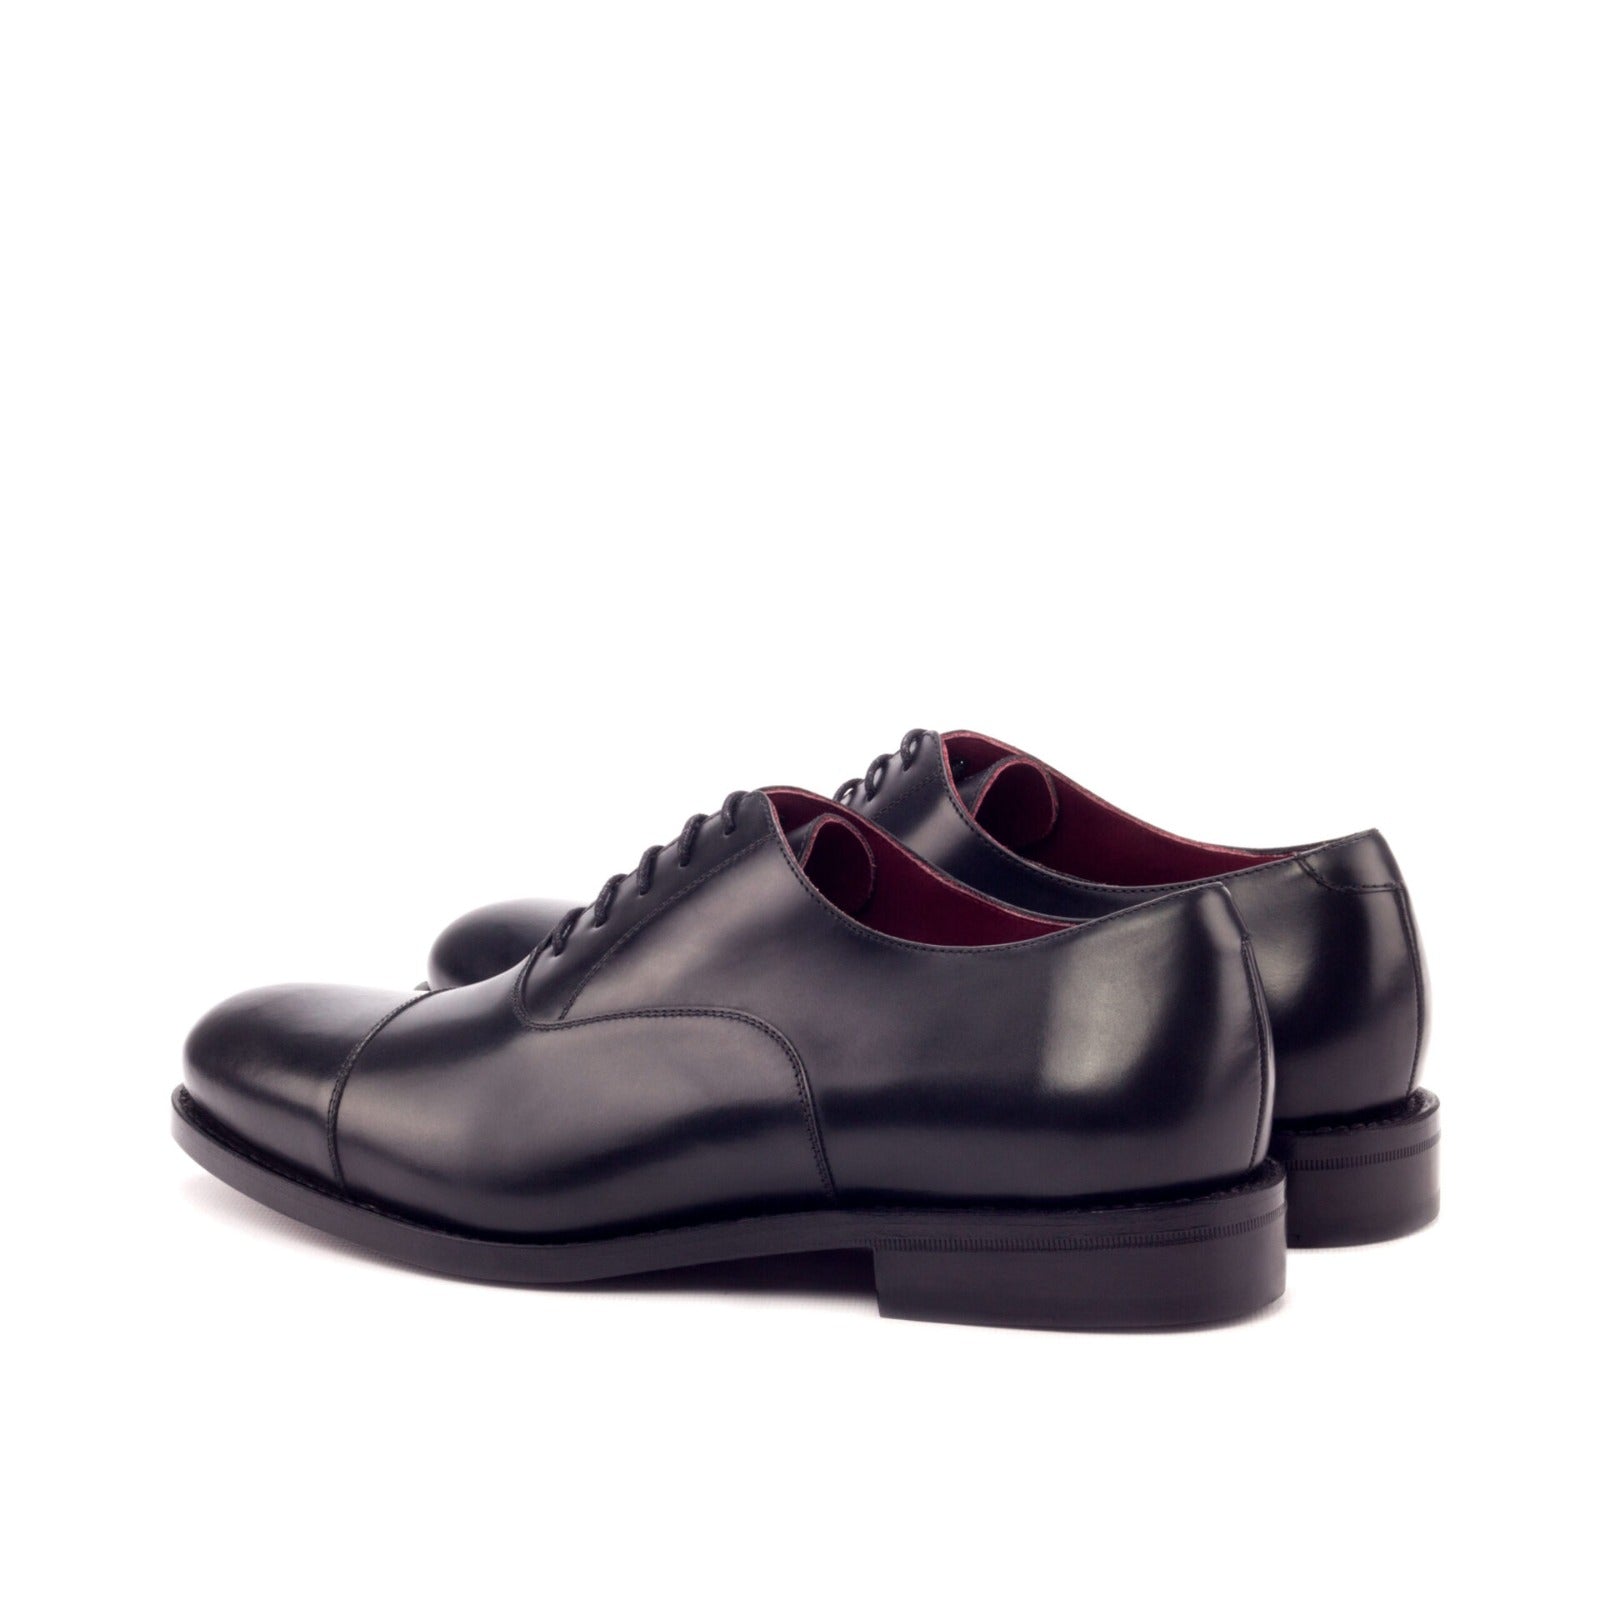 Belmont Leather Oxford Shoes